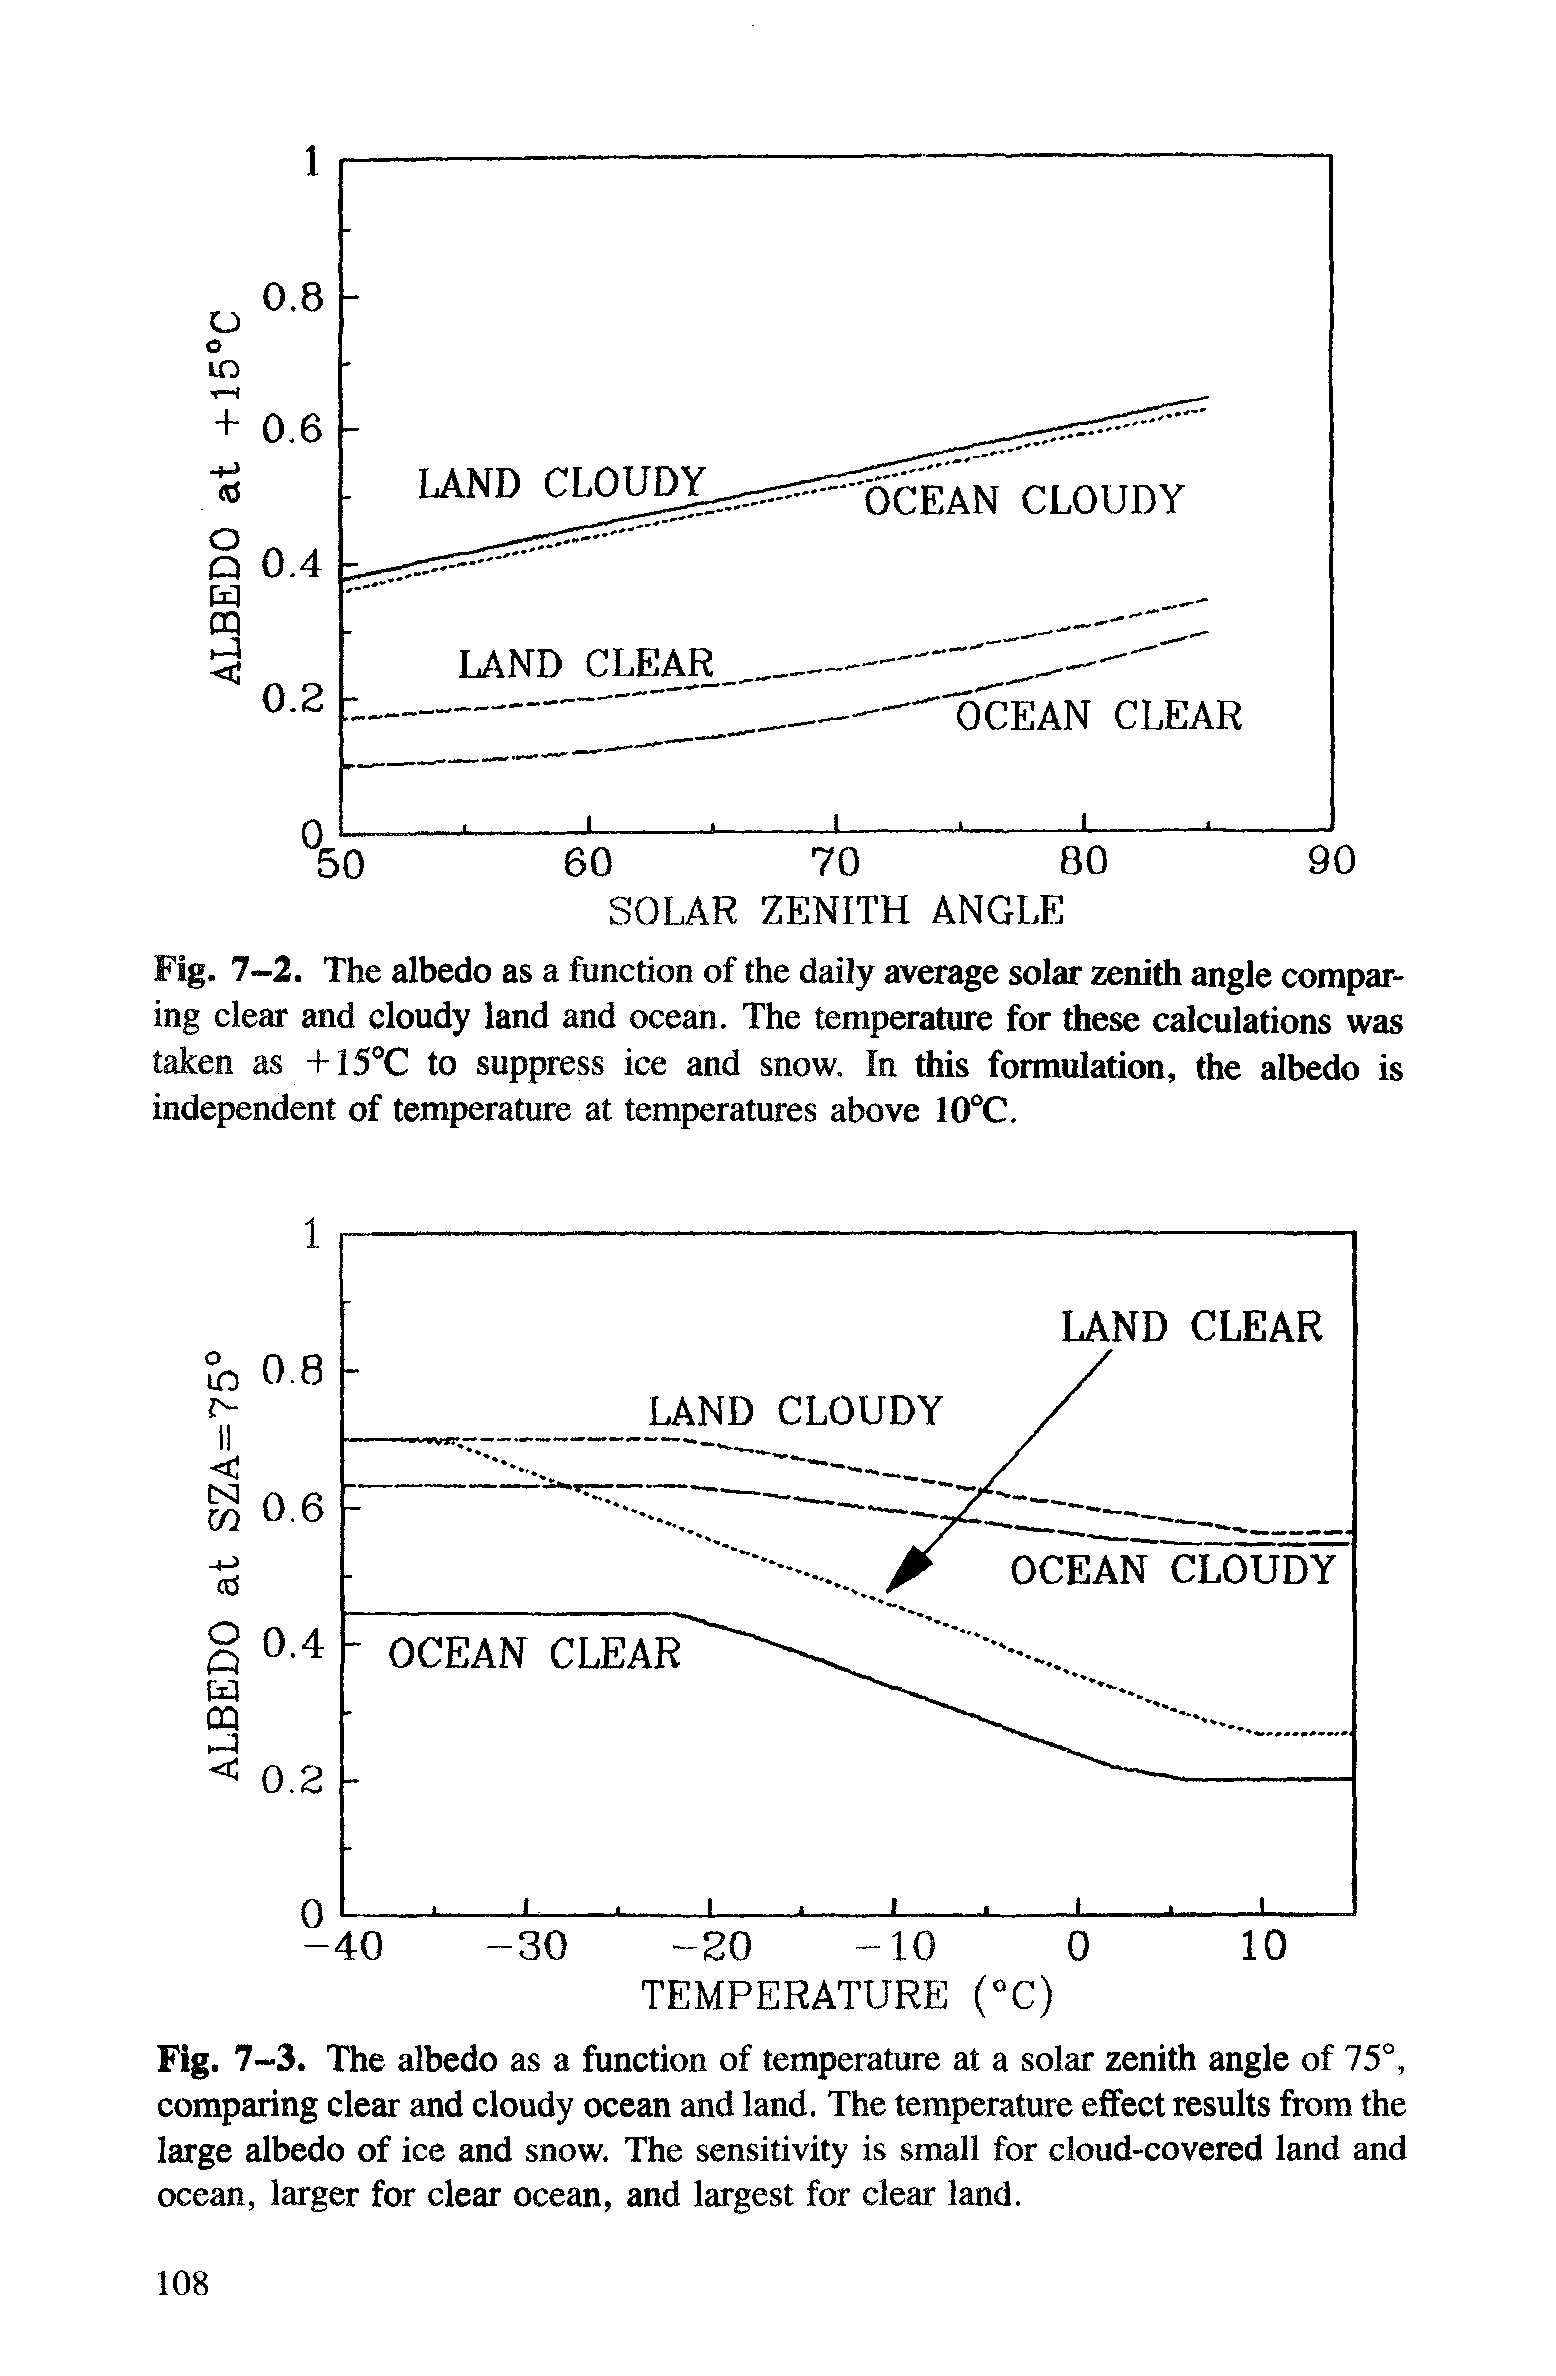 Fig. 7-2. The albedo as a function of the daily average solar zenith angle comparing clear and cloudy land and ocean. The temperature for these calculations was taken as +15°C to suppress ice and snow. In this formulation, the albedo is...